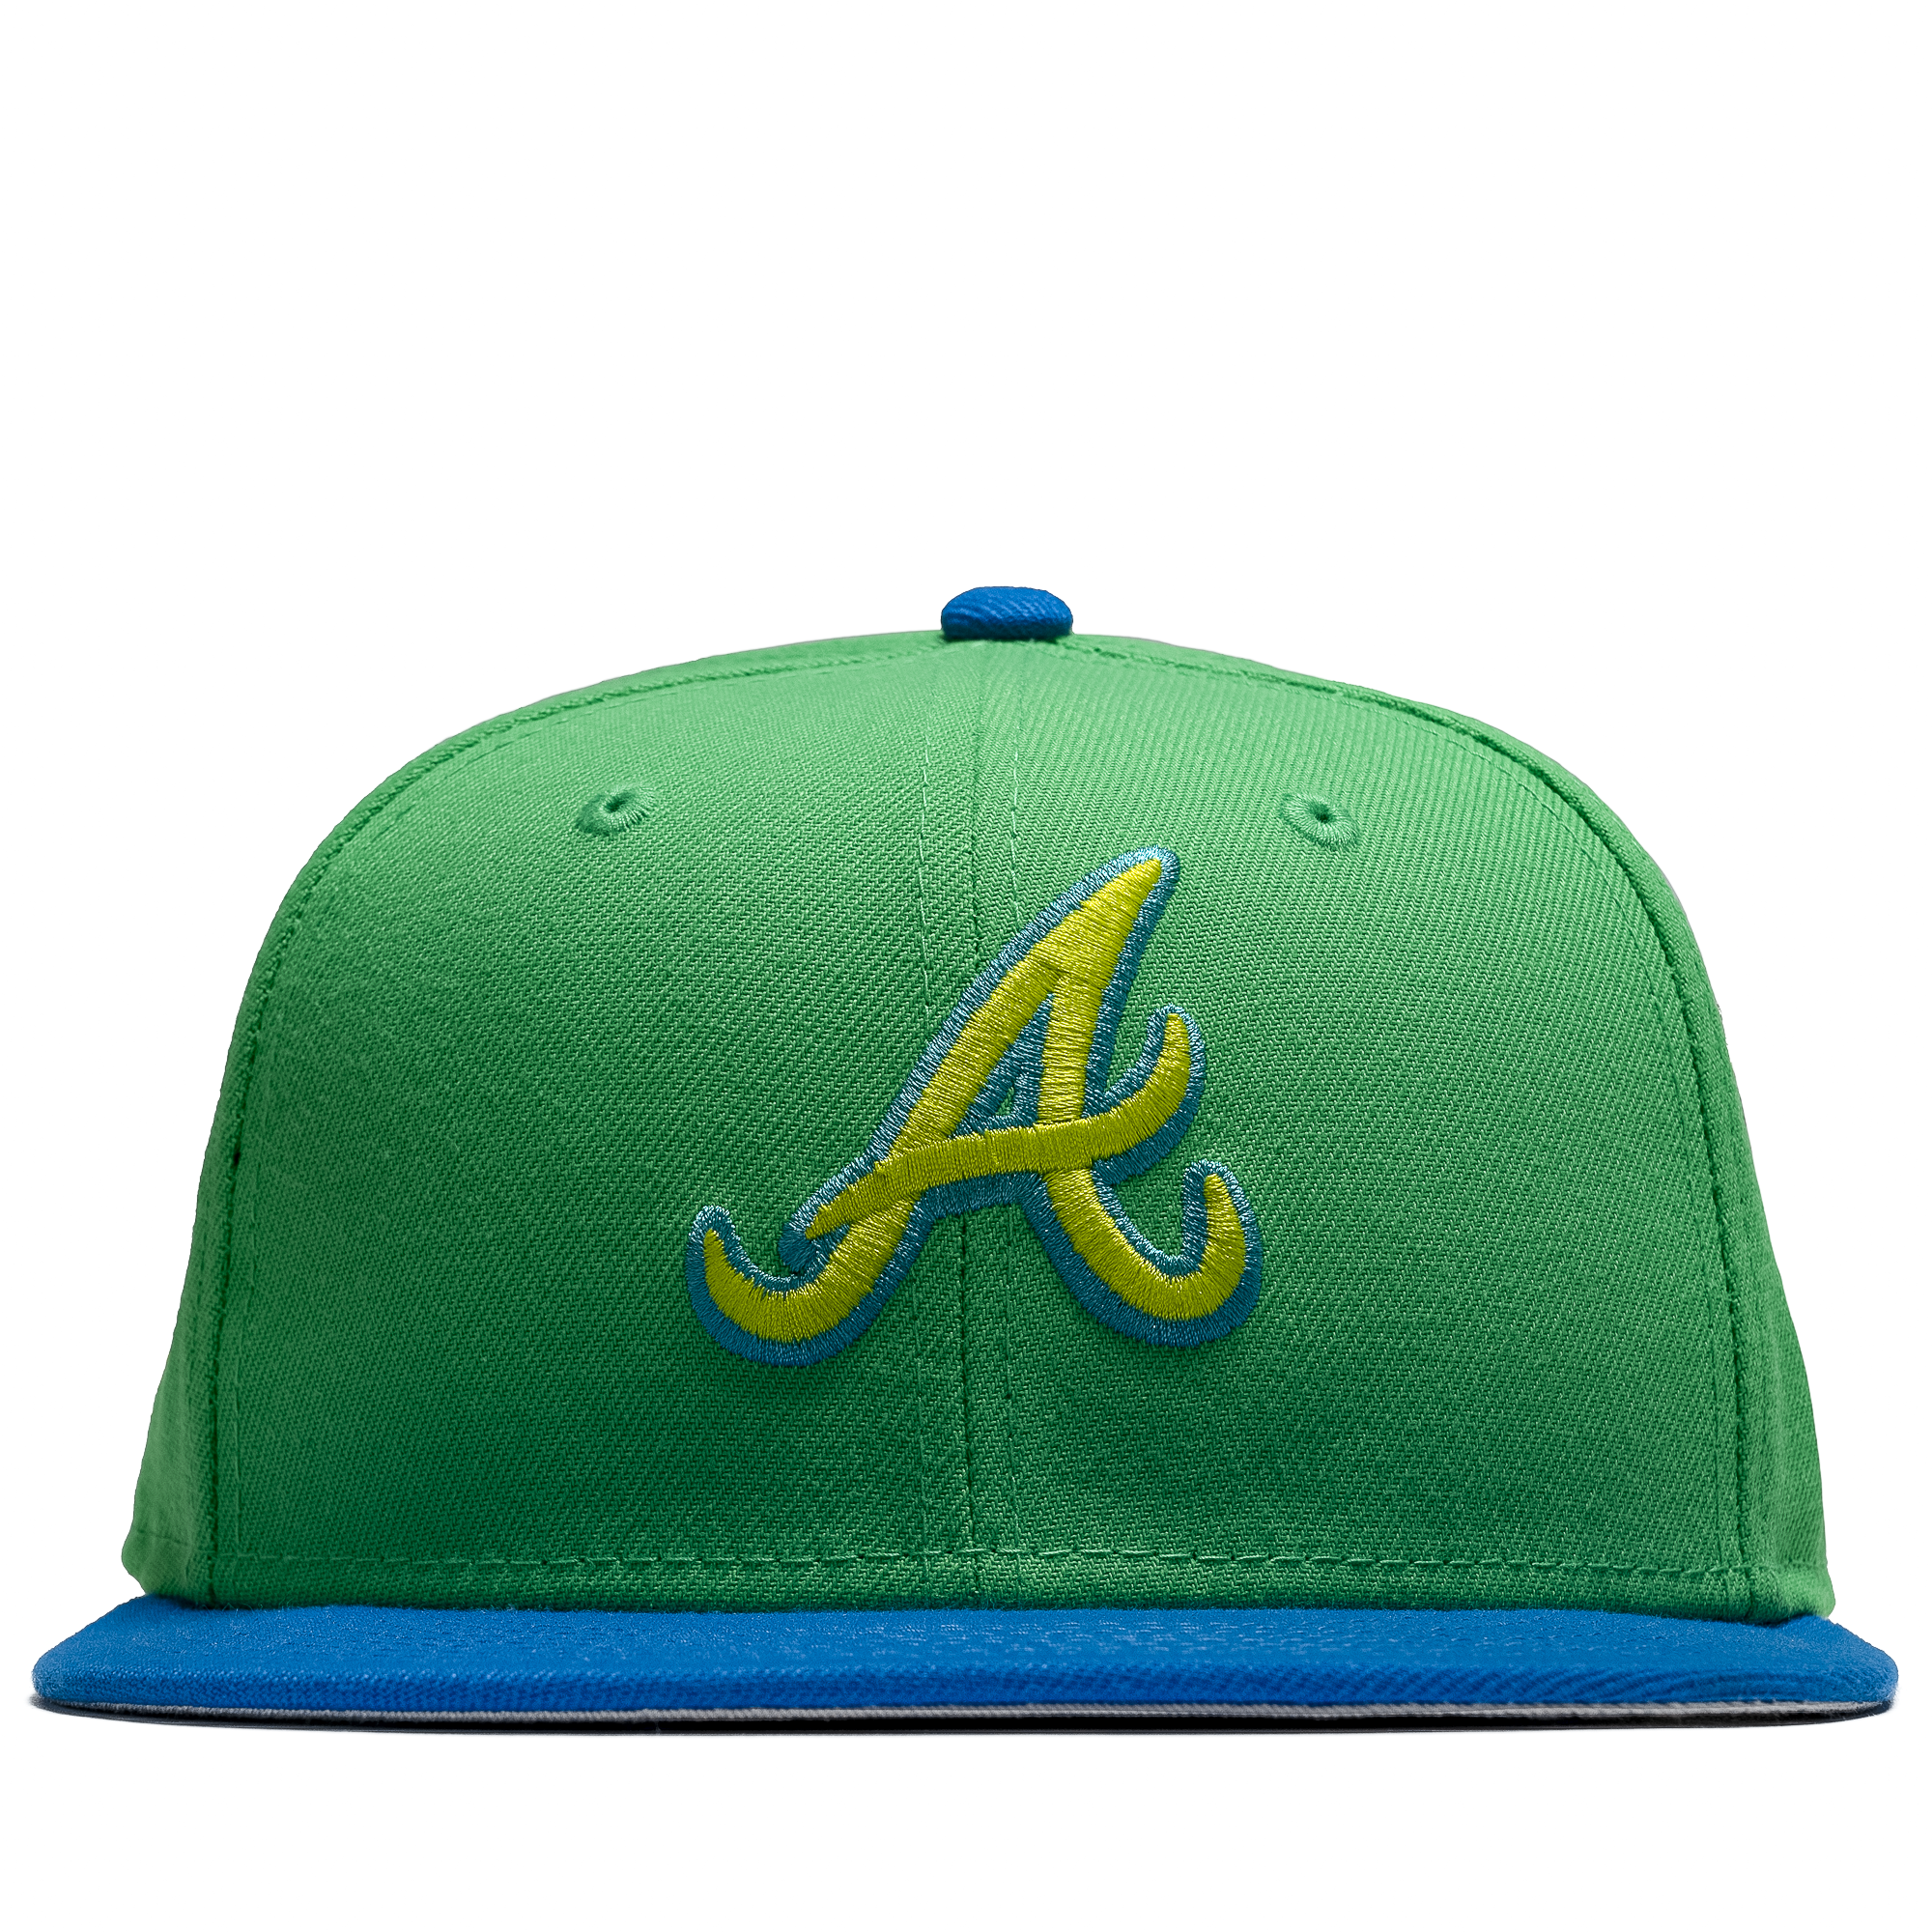 New Era x Politics Milwaukee Brewers 59FIFTY Fitted Hat - Chrome/Green, Size 7 3/4 by Sneaker Politics